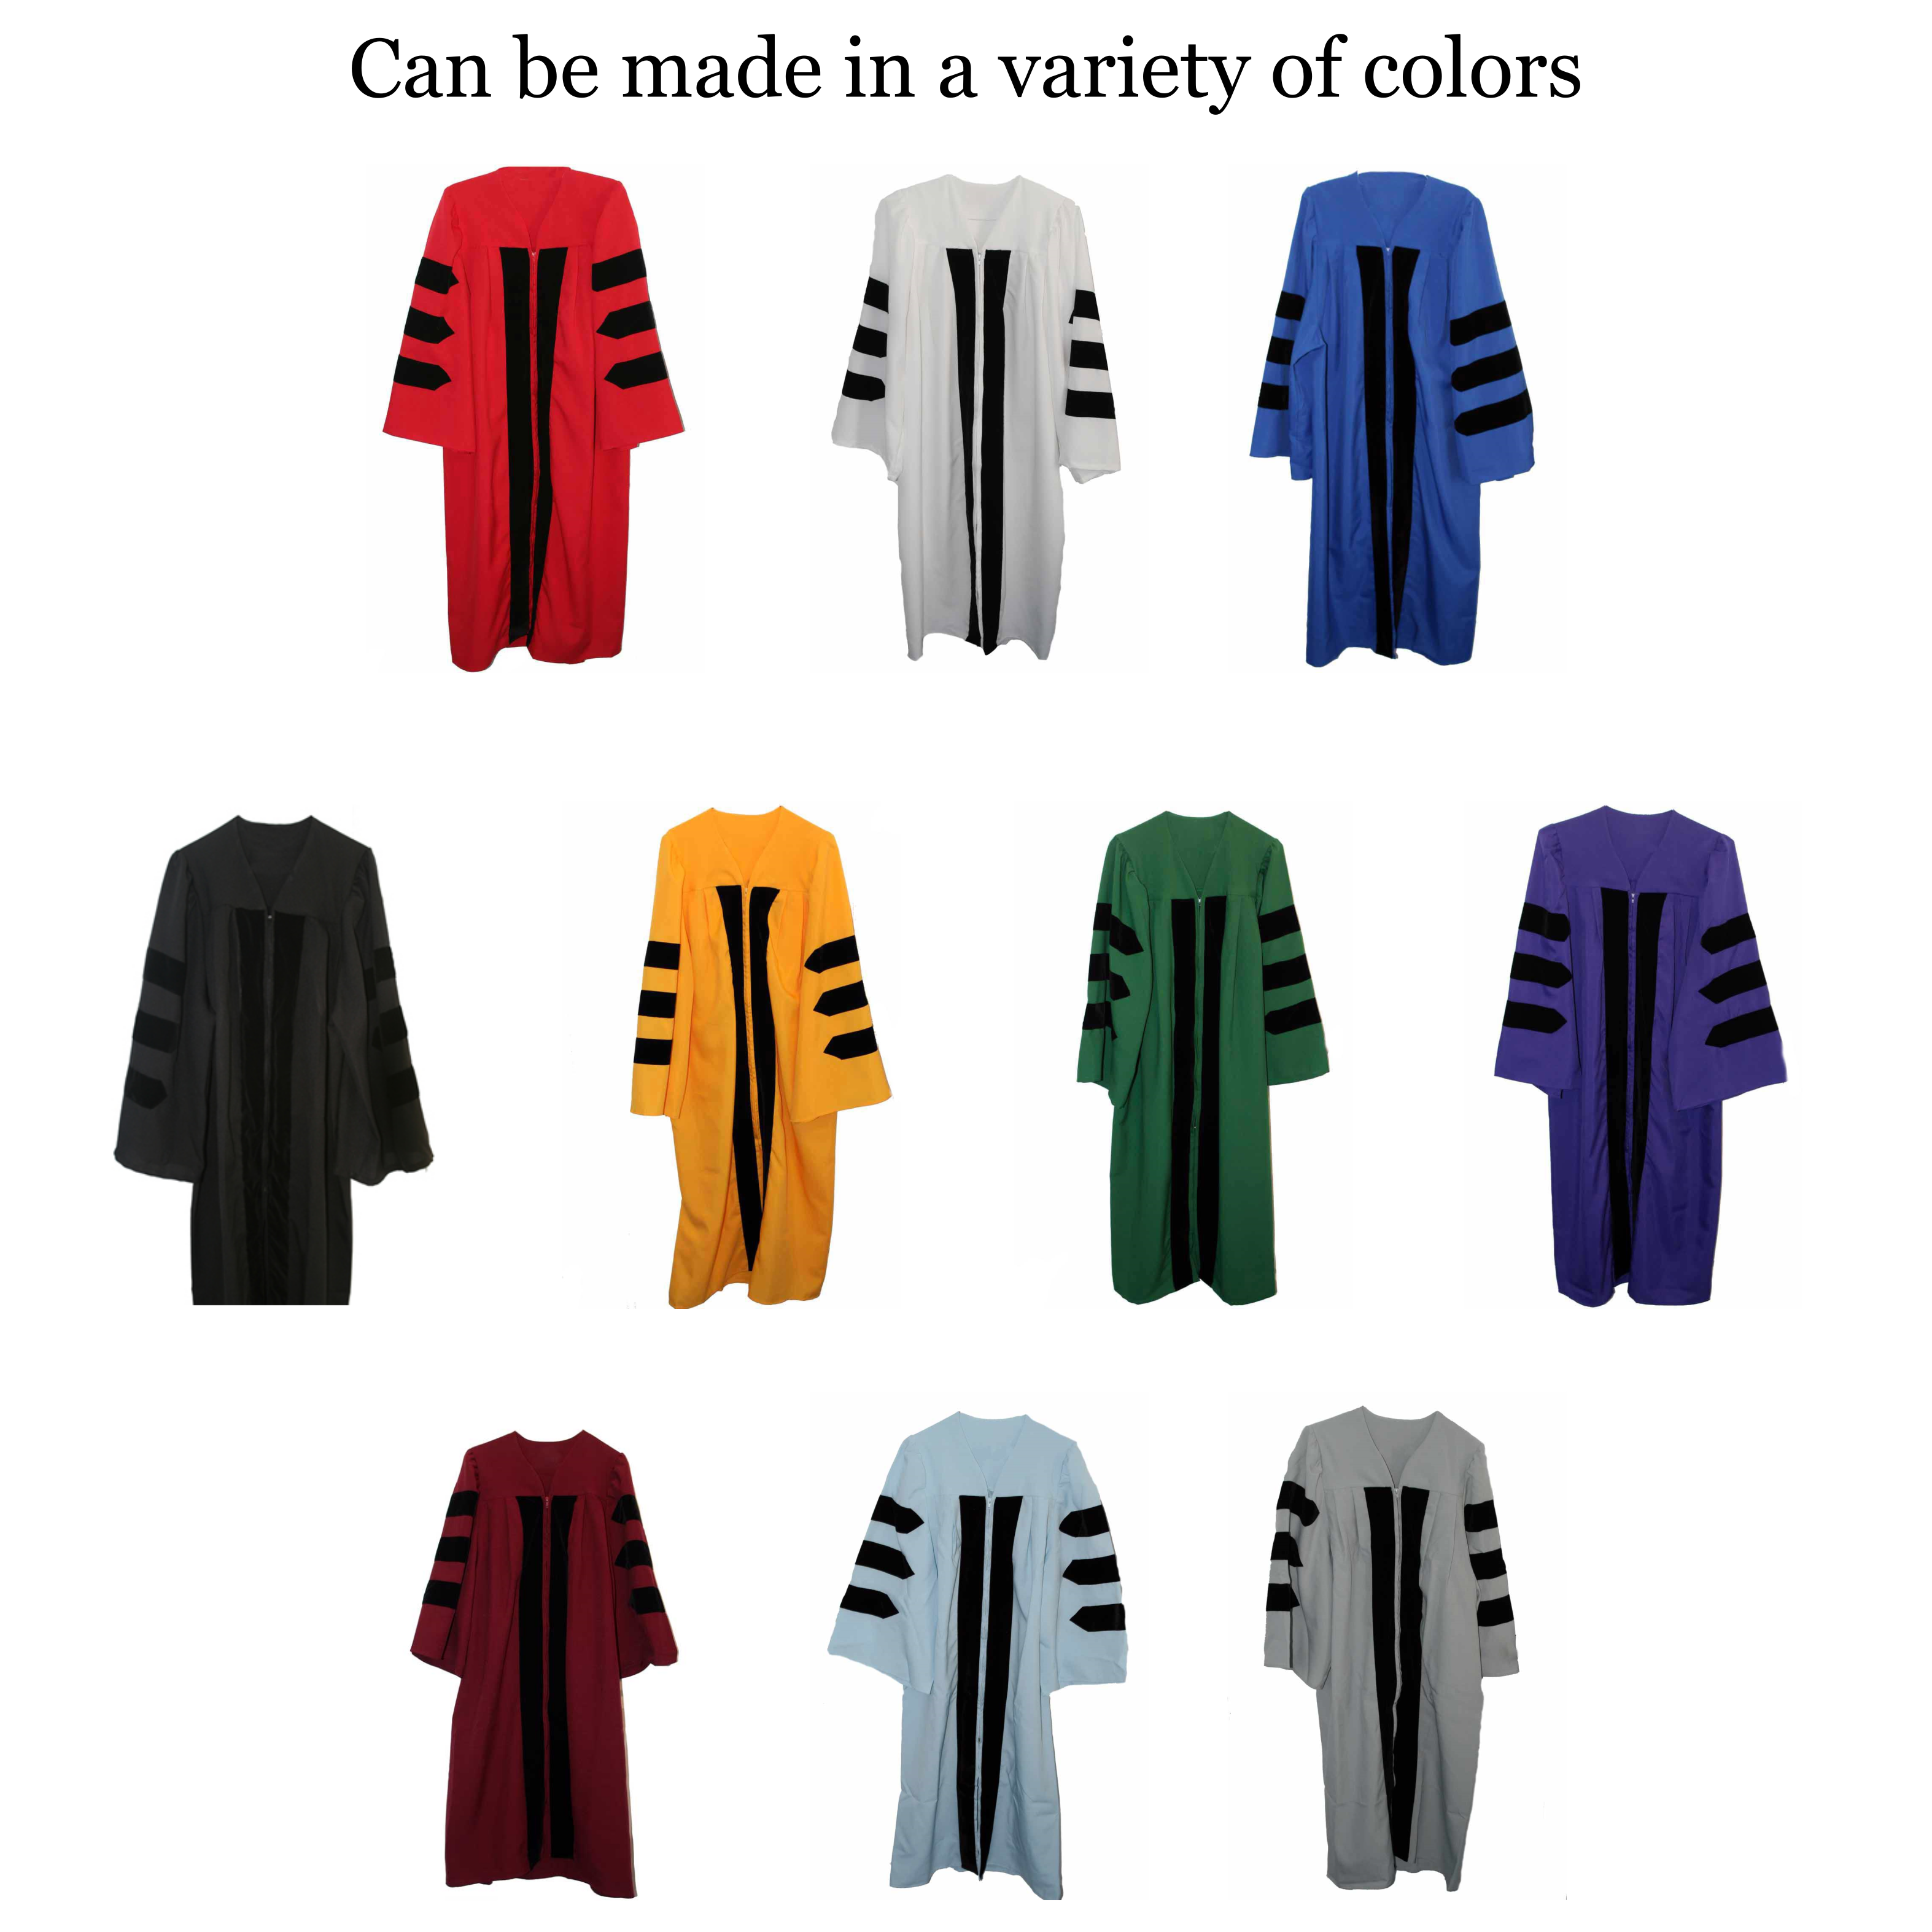 lescapsgown Deluxe Doctoral Graduation Gown Hood and India | Ubuy